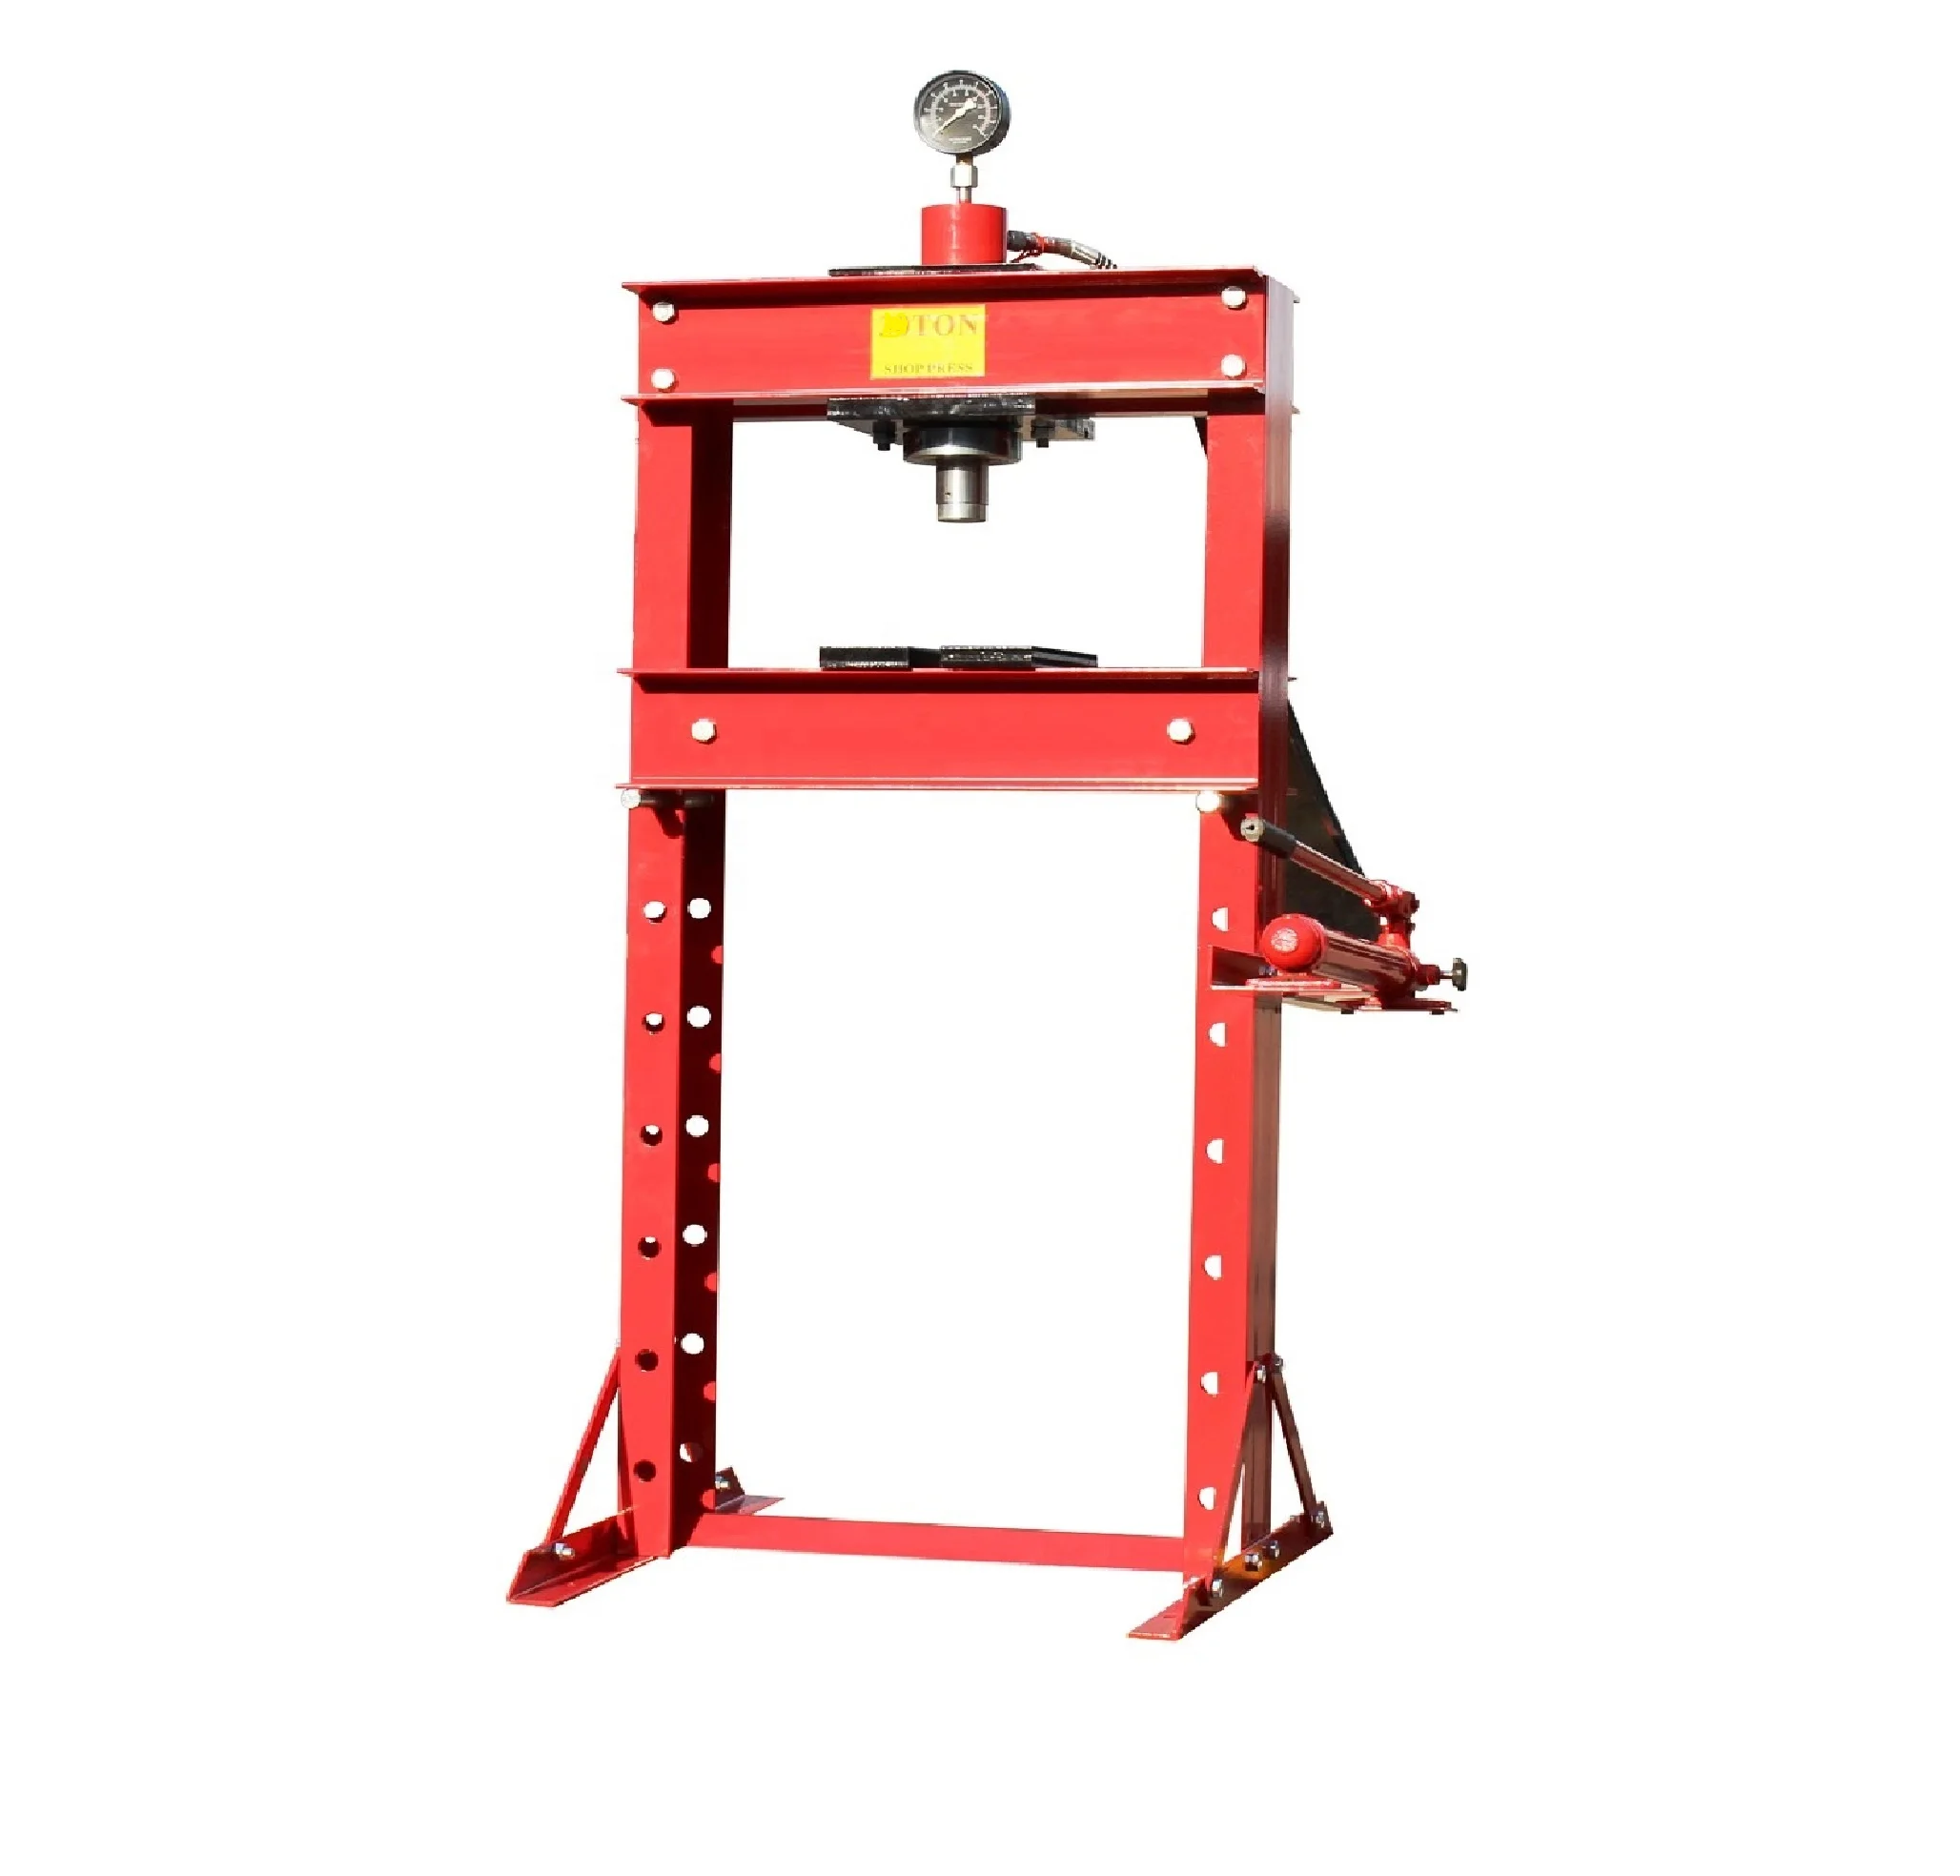 
12 Ton Hot Selling Professional Red Hydraulic Shop Press With Hand Pump 